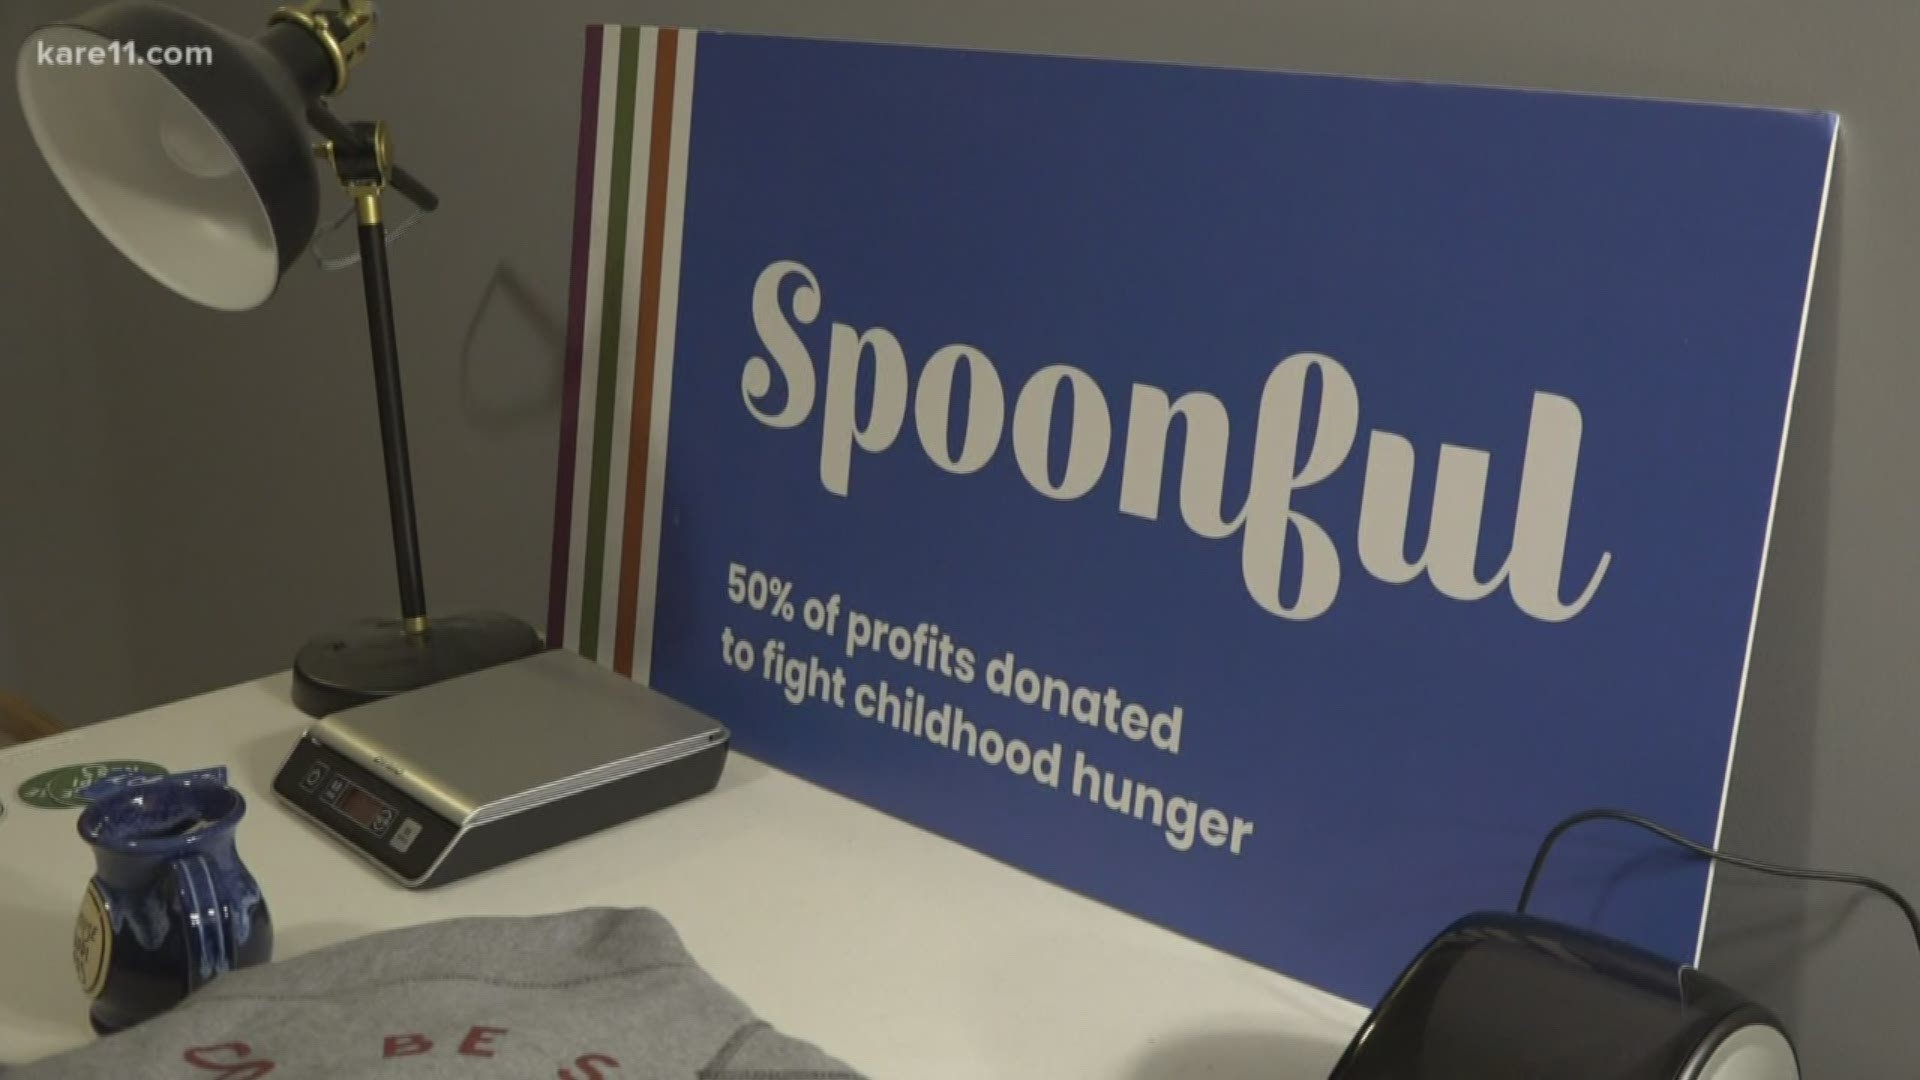 The founder of Spoonful Apparel talks about her mission to sell product with a positive message to help curb childhood hunger.